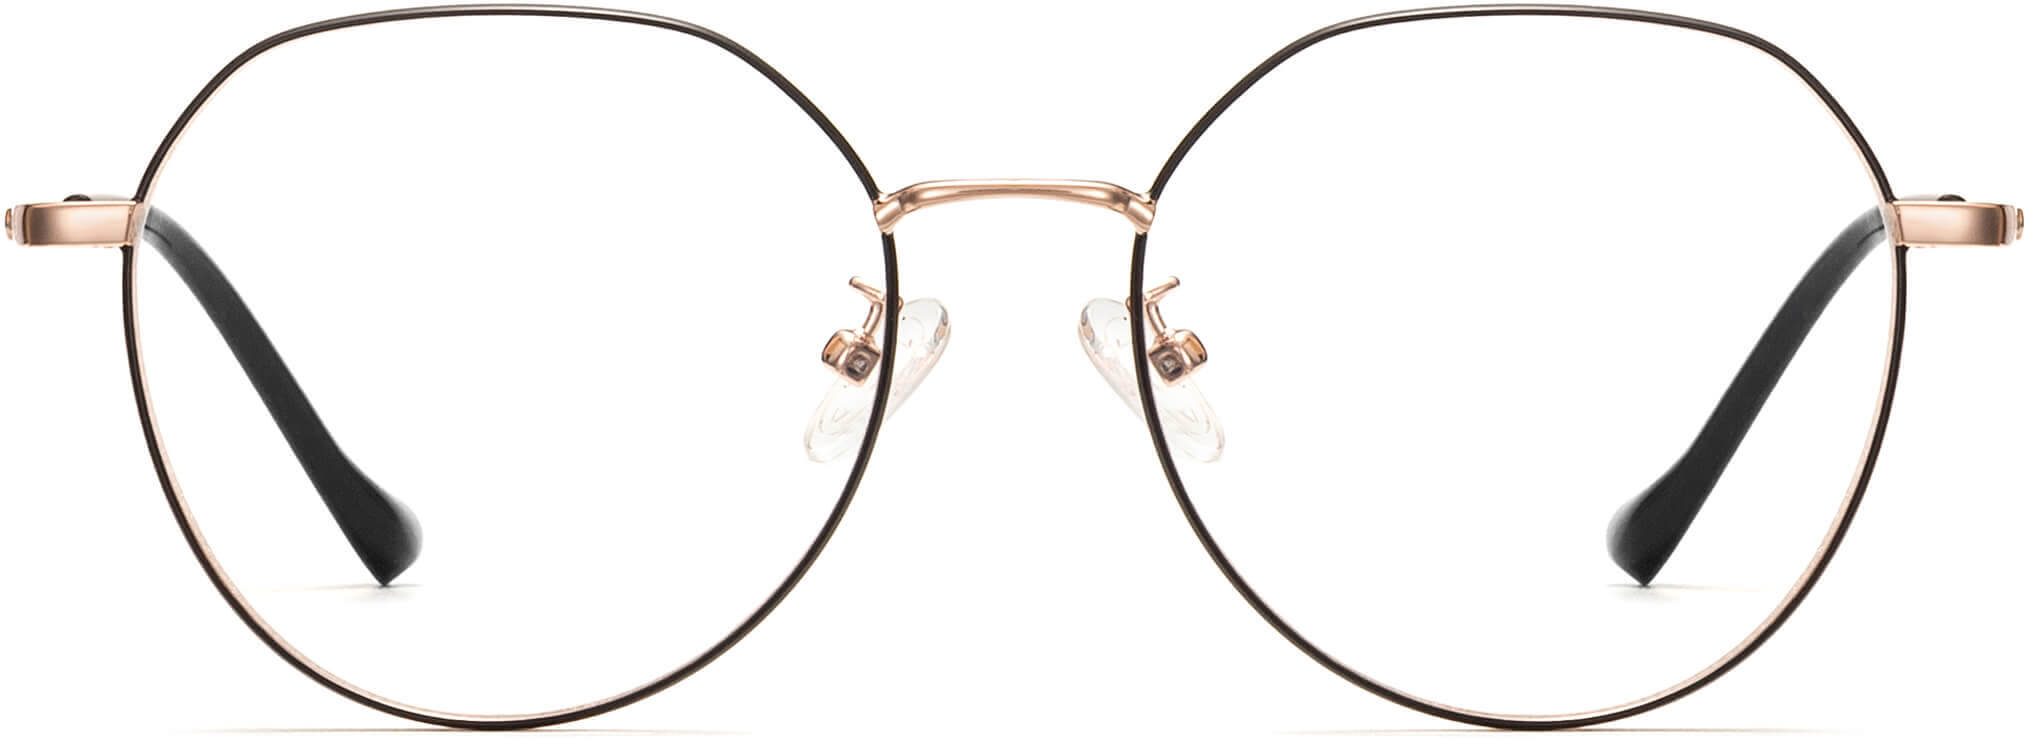 Sydney Gloden Metal Eyeglasses from ANRRI, Front View